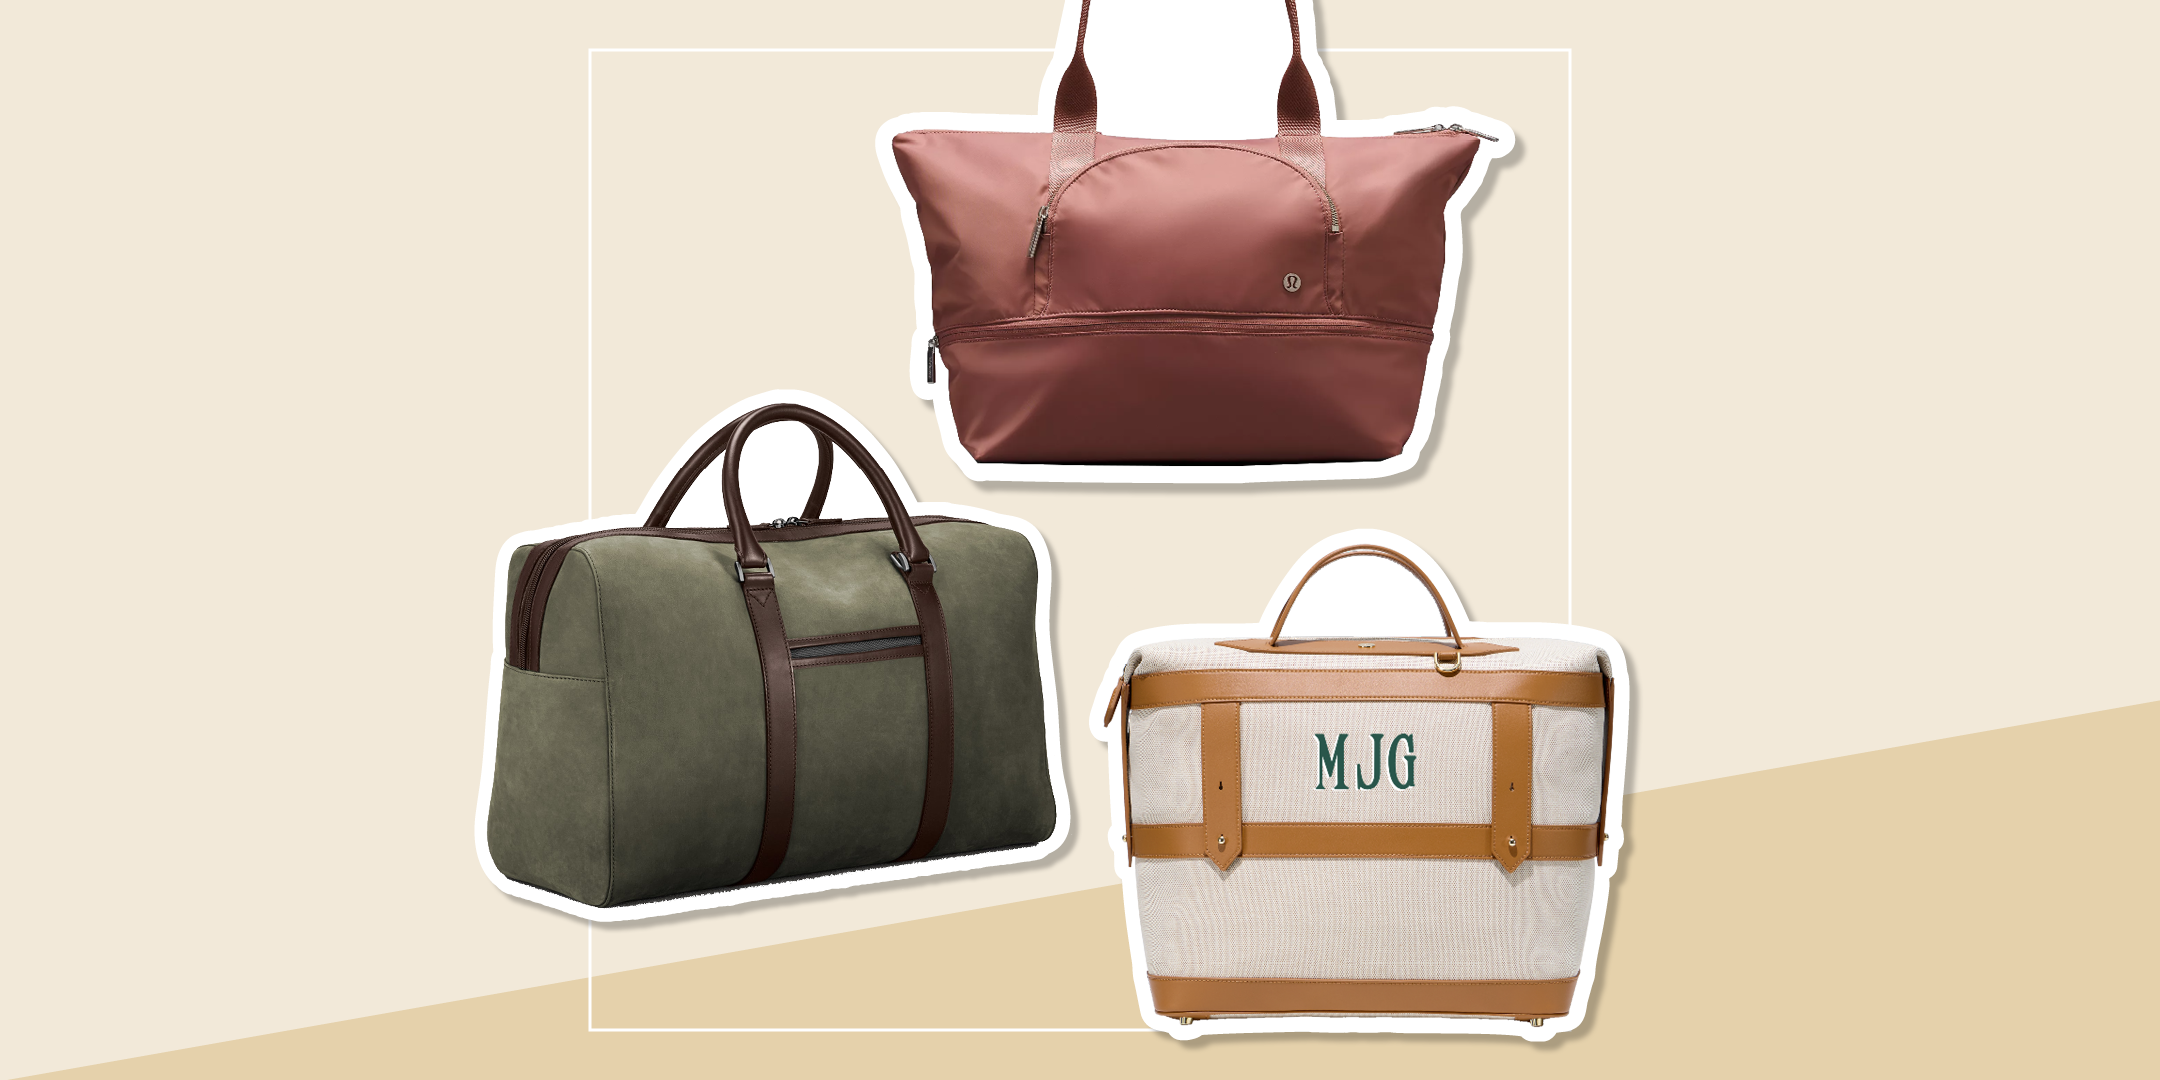 <p>When it comes to travel, <a href="https://www.veranda.com/shopping/g60333759/best-travel-tote-bags/">the right bag</a> is essential. Making sure you have a bag that can carry all your necessities is a crucial, yet often overlooked, aspect of trip preparation. We've previously offered recommendations for <a href="https://www.veranda.com/travel/g43402751/best-luxury-designer-luggage-brands/">luxury luggage</a>, <a href="https://www.veranda.com/shopping/g60298597/best-luggage-sets/">travel sets</a>, and even <a href="https://www.veranda.com/shopping/g45711664/best-crossbody-bags-for-travel/">crossbody bags</a> for travel, but now we're highlighting an unsung hero of transportation: the weekender bag.</p><p>We reached out Tom Marchant, CEO and co-founder of luxury travel brand <a href="https://www.blacktomato.com/us/">Black Tomato</a>, to talk a bit about these travel staples. He says investing in weekender bags that are lightweight and easy can make all the difference. He shares, "as the name might suggest, [weekender bags work for] long weekends or more ambitious trips where there are weight limitations for a flight." </p><p>Slightly larger than the average backpack yet not as cumbersome as a rolling carry-on, the weekender bag effortlessly fills the niche between the two. These bags, typically featuring an over-the-shoulder strap, are equipped with modern features such as key hooks, water bottle holders, shoe pockets and more, signaling that now is an excellent time to invest in one. </p><p>Weekender bags are perfect for all kinds of travel, from road trips to luxury international travel. For the most part, you can trust that your weekender bag will fit on the plane with you, whether under the seat in front of you or in the overhead compartment. Weekender bags also tend to be lighter than other luggage, which is an important consideration when traveling. Read on to discover 19 travel expert-approved weekender bags.</p>